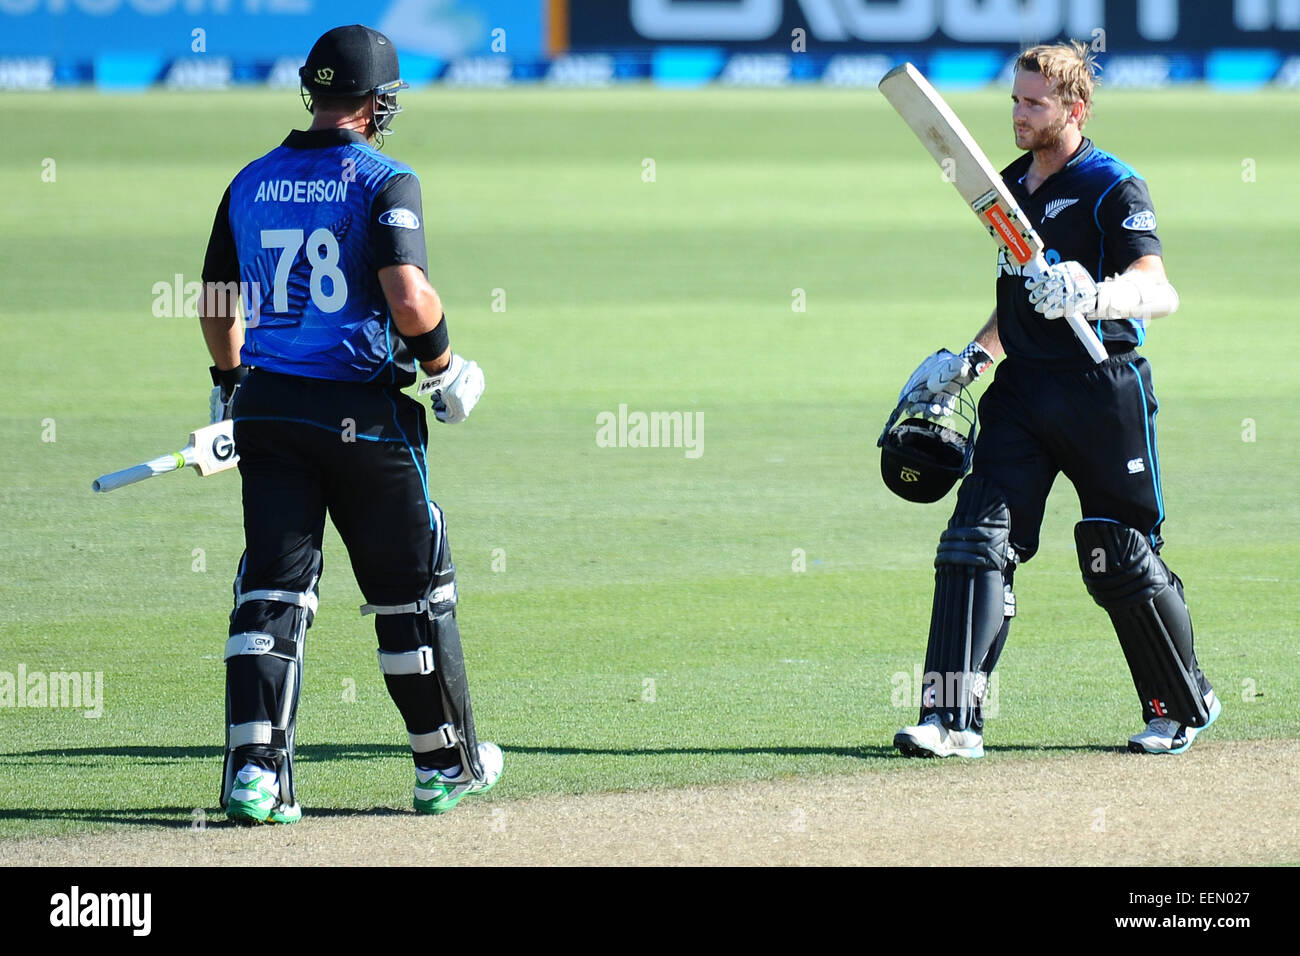 Saxton Oval, Nelson, New Zealand. 20th Jan, 2015. Black Cap player Kane Williamson celebrates his ODI century during Match 4 of the ANZ One Day International Cricket Series between New Zealand Black Caps and Sri Lanka at Saxton Oval, Nelson, New Zealand. Tuesday 20 January 2015. Credit:  Action Plus Sports/Alamy Live News Stock Photo